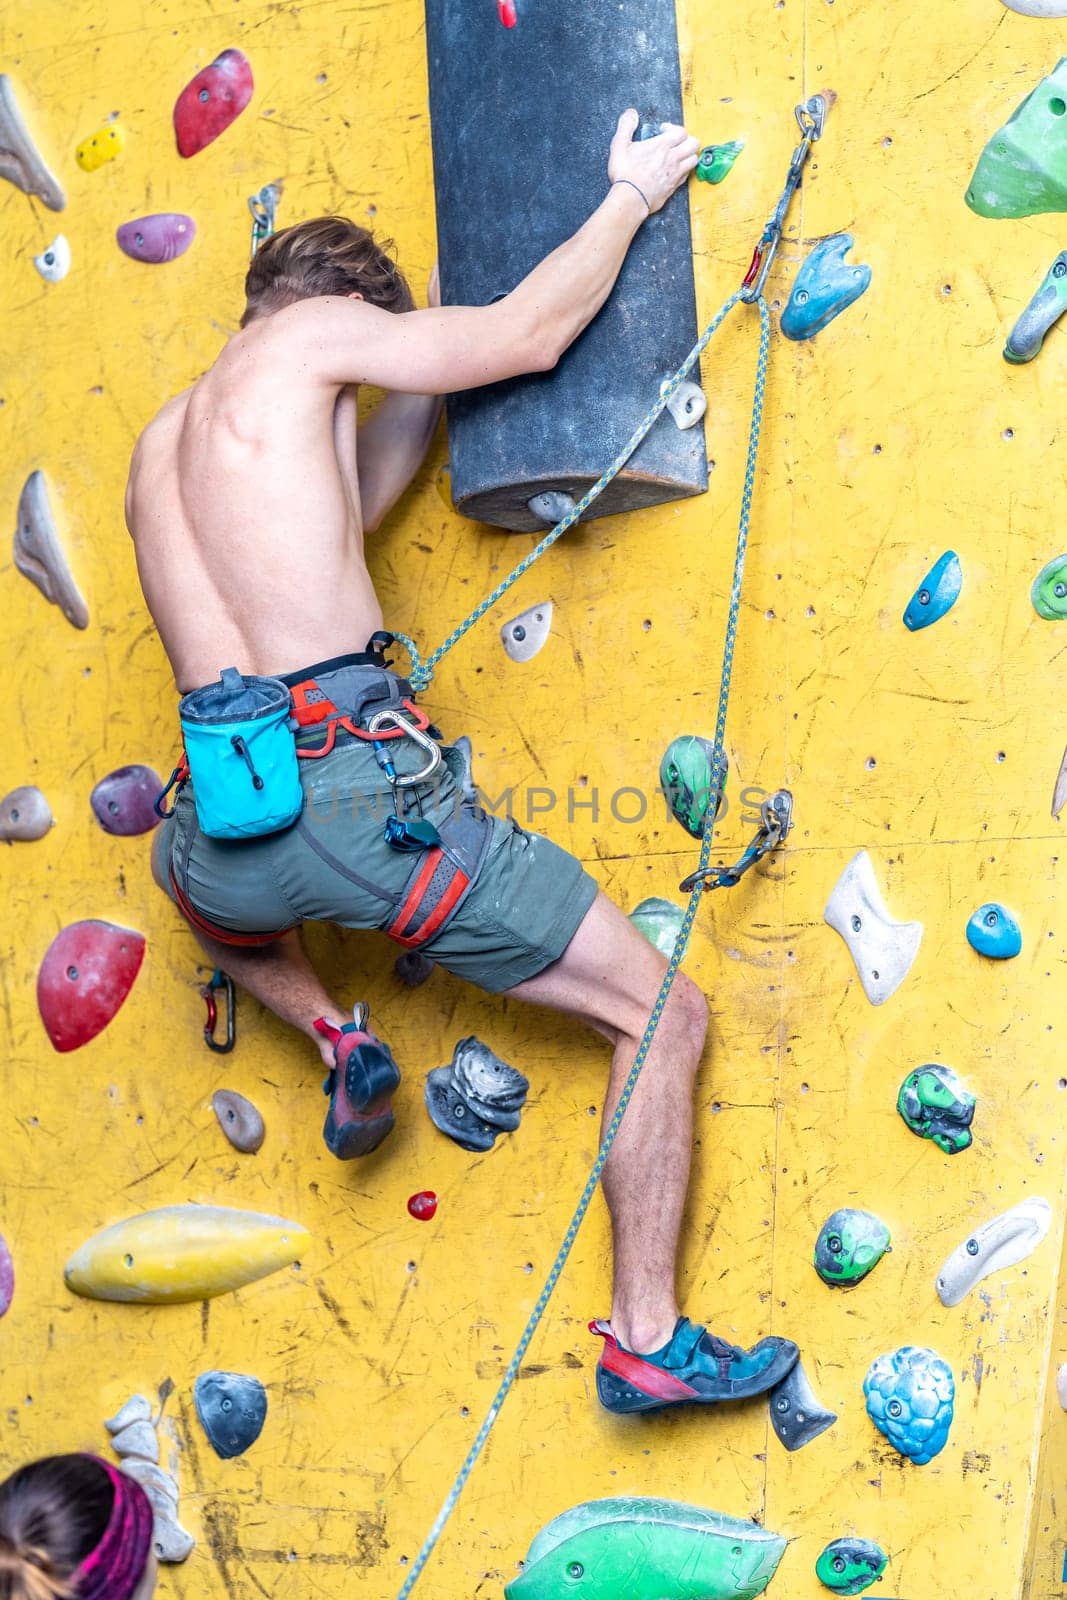 climbers on artificial climbing walls by Edophoto